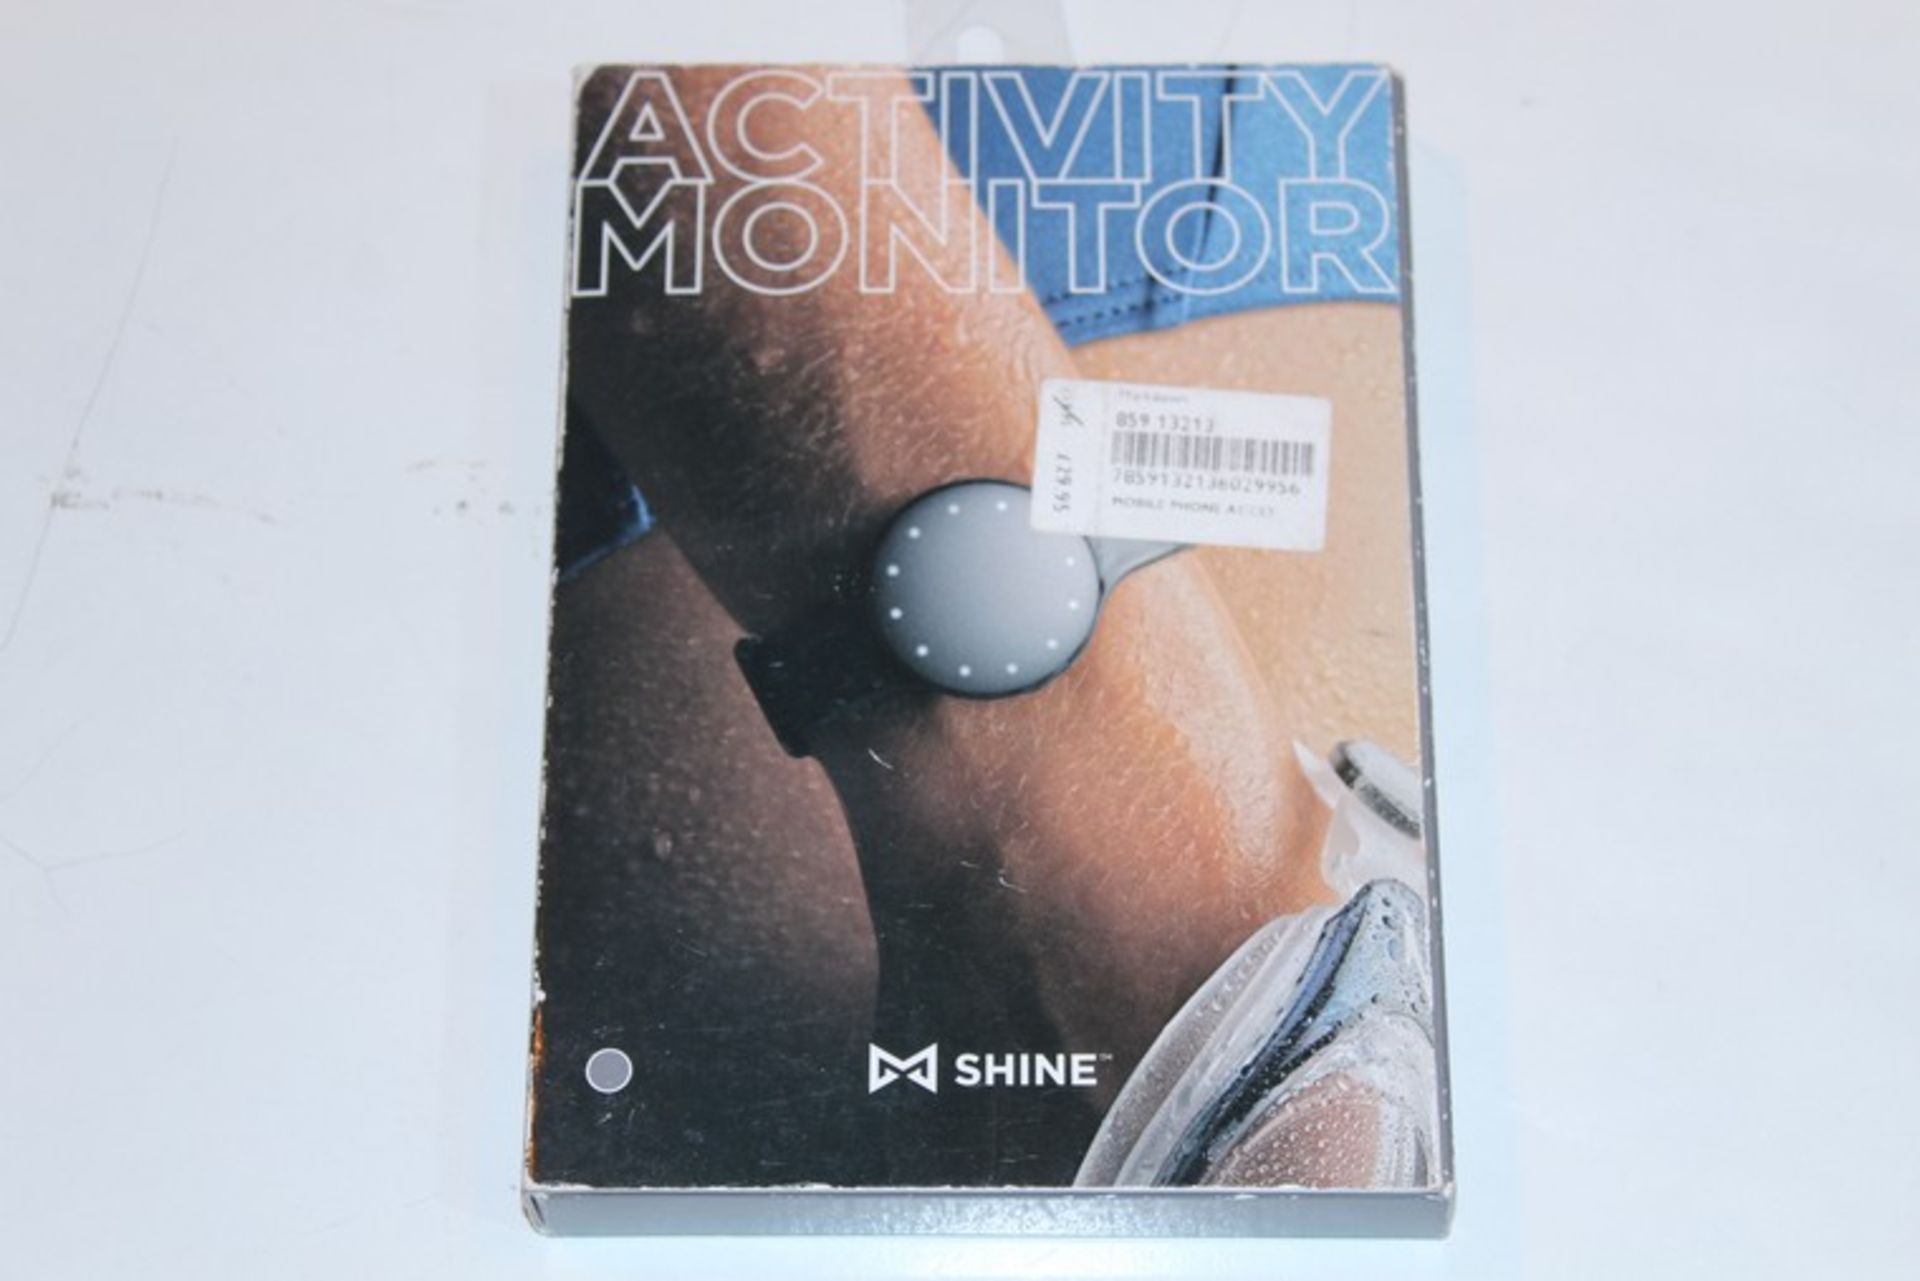 2 x BOXED ACTIVITY MONITORS BY SHINE (16.10.17) (36.120) *PLEASE NOTE THAT THE BID PRICE IS